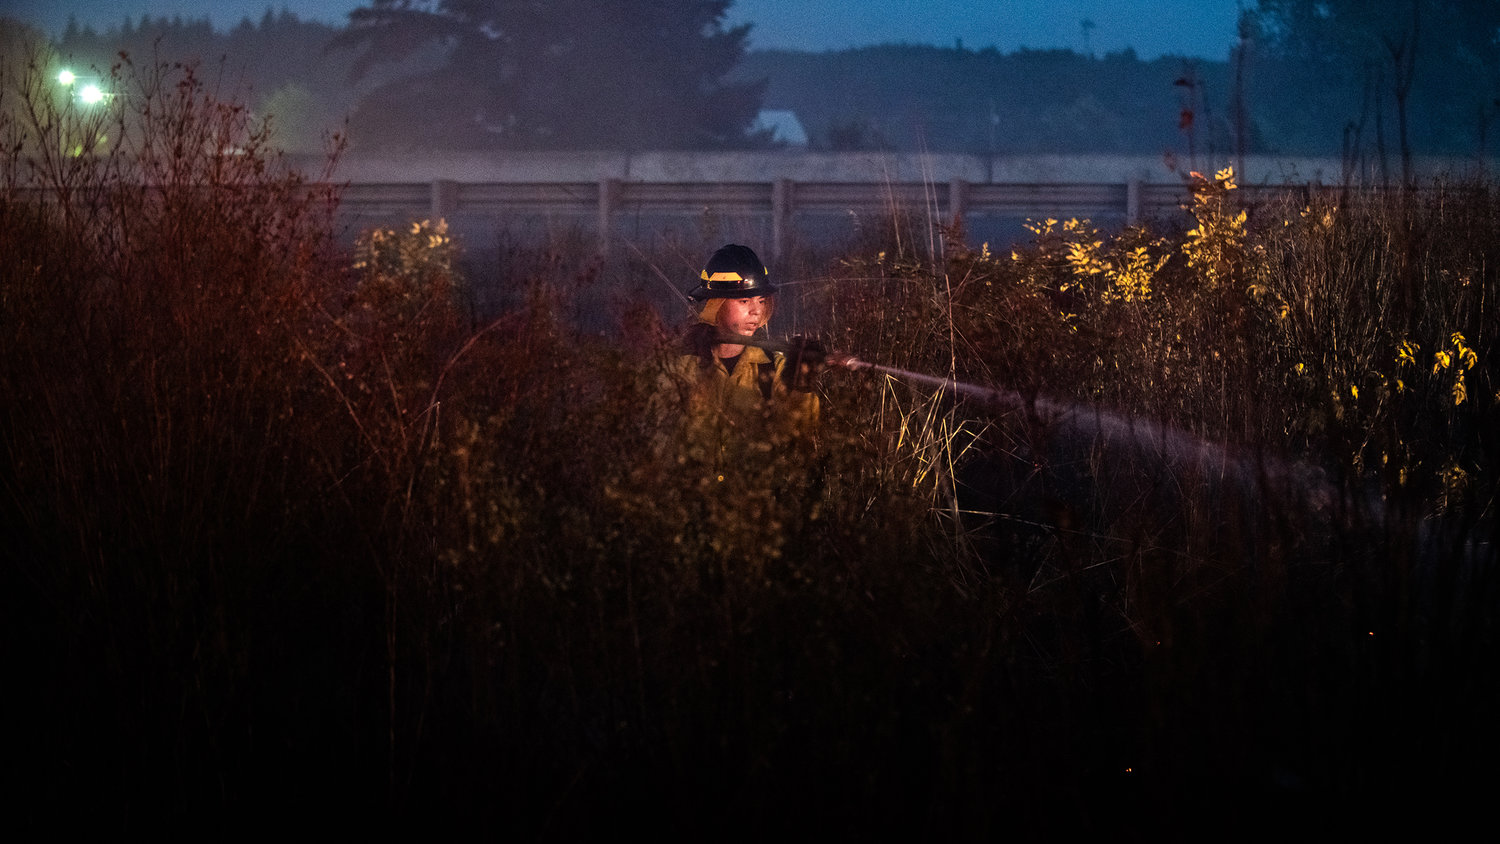 A firefighter uses a hose to extinguish flames near Interstate 5 Thursday night in Grand Mound.